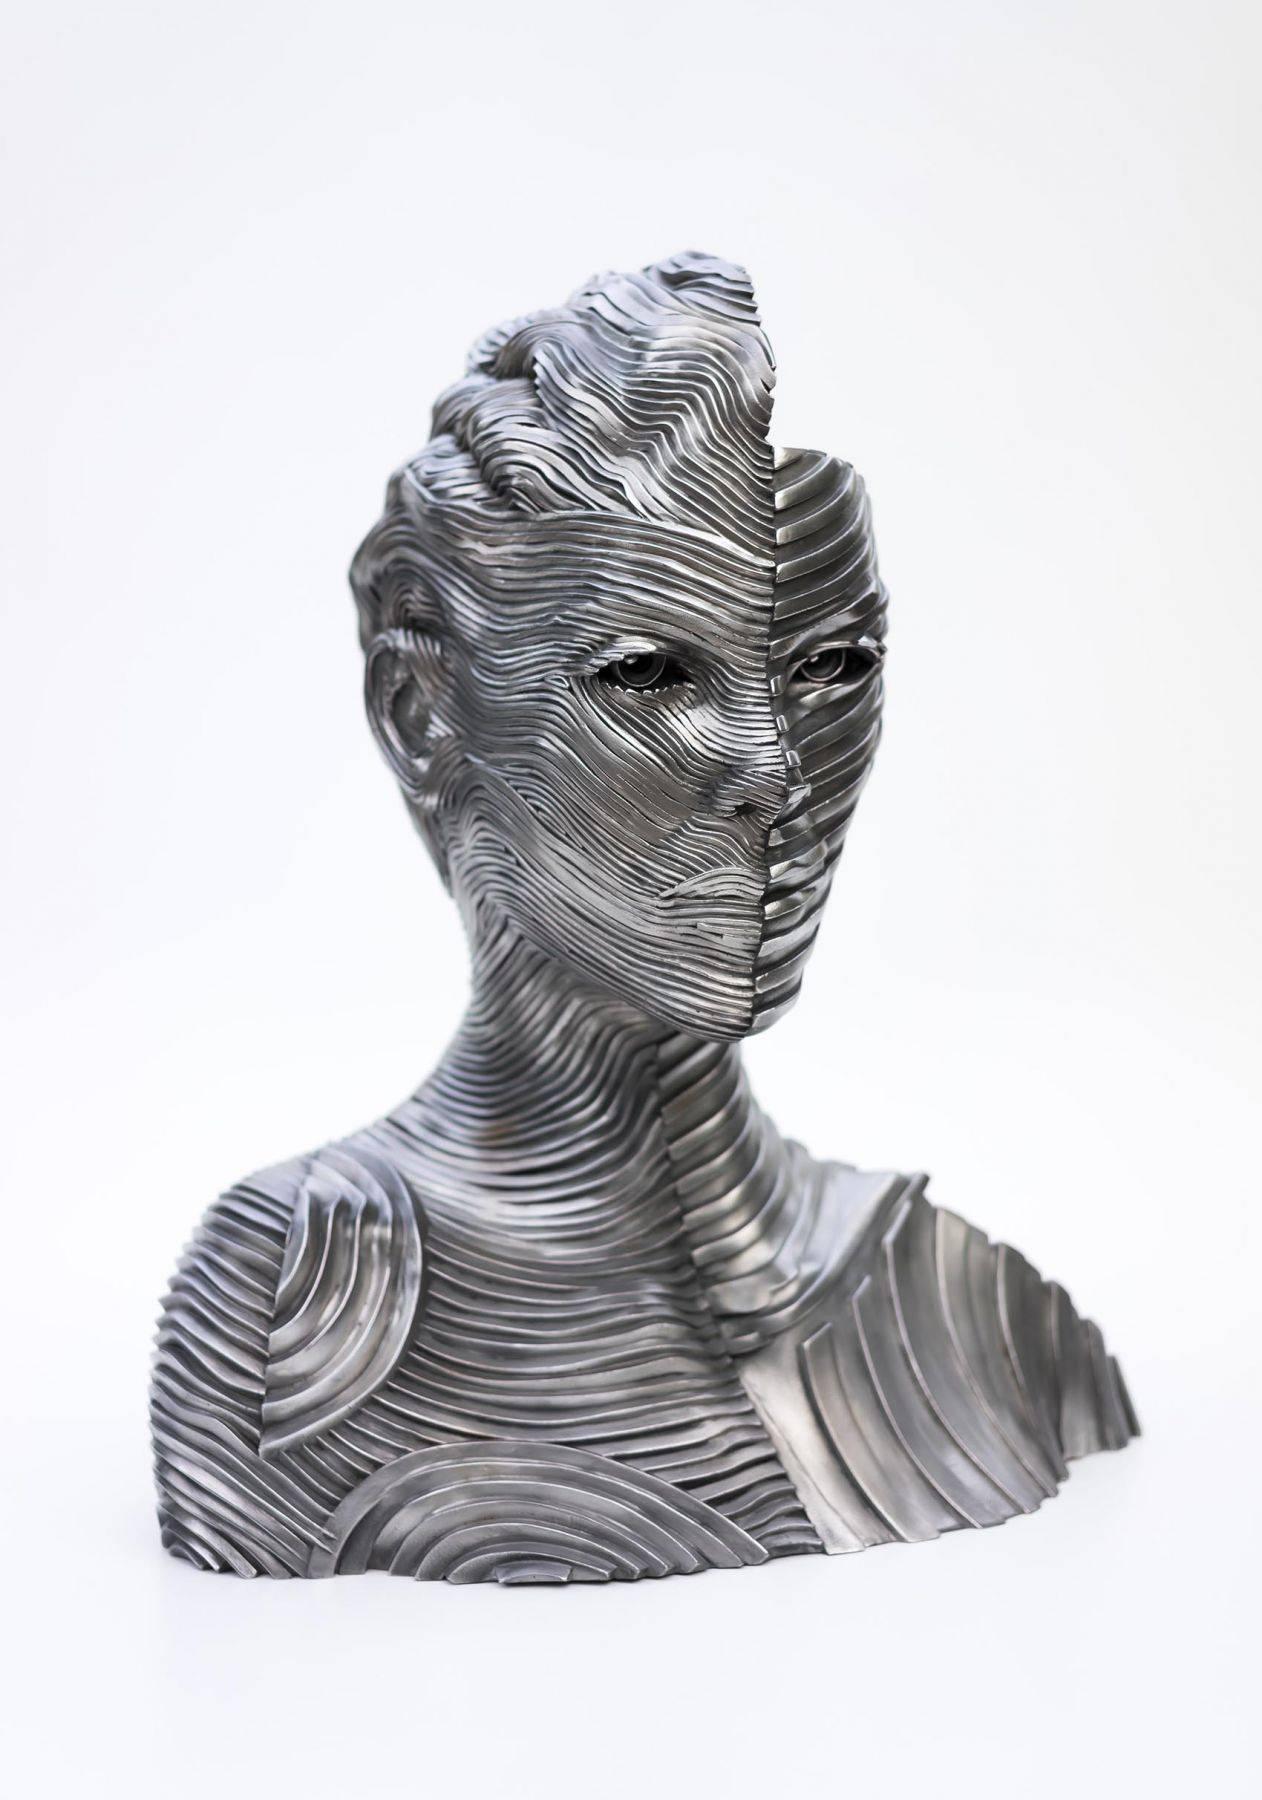 My Mirror Remains - Contemporary Sculpture by Gil Bruvel